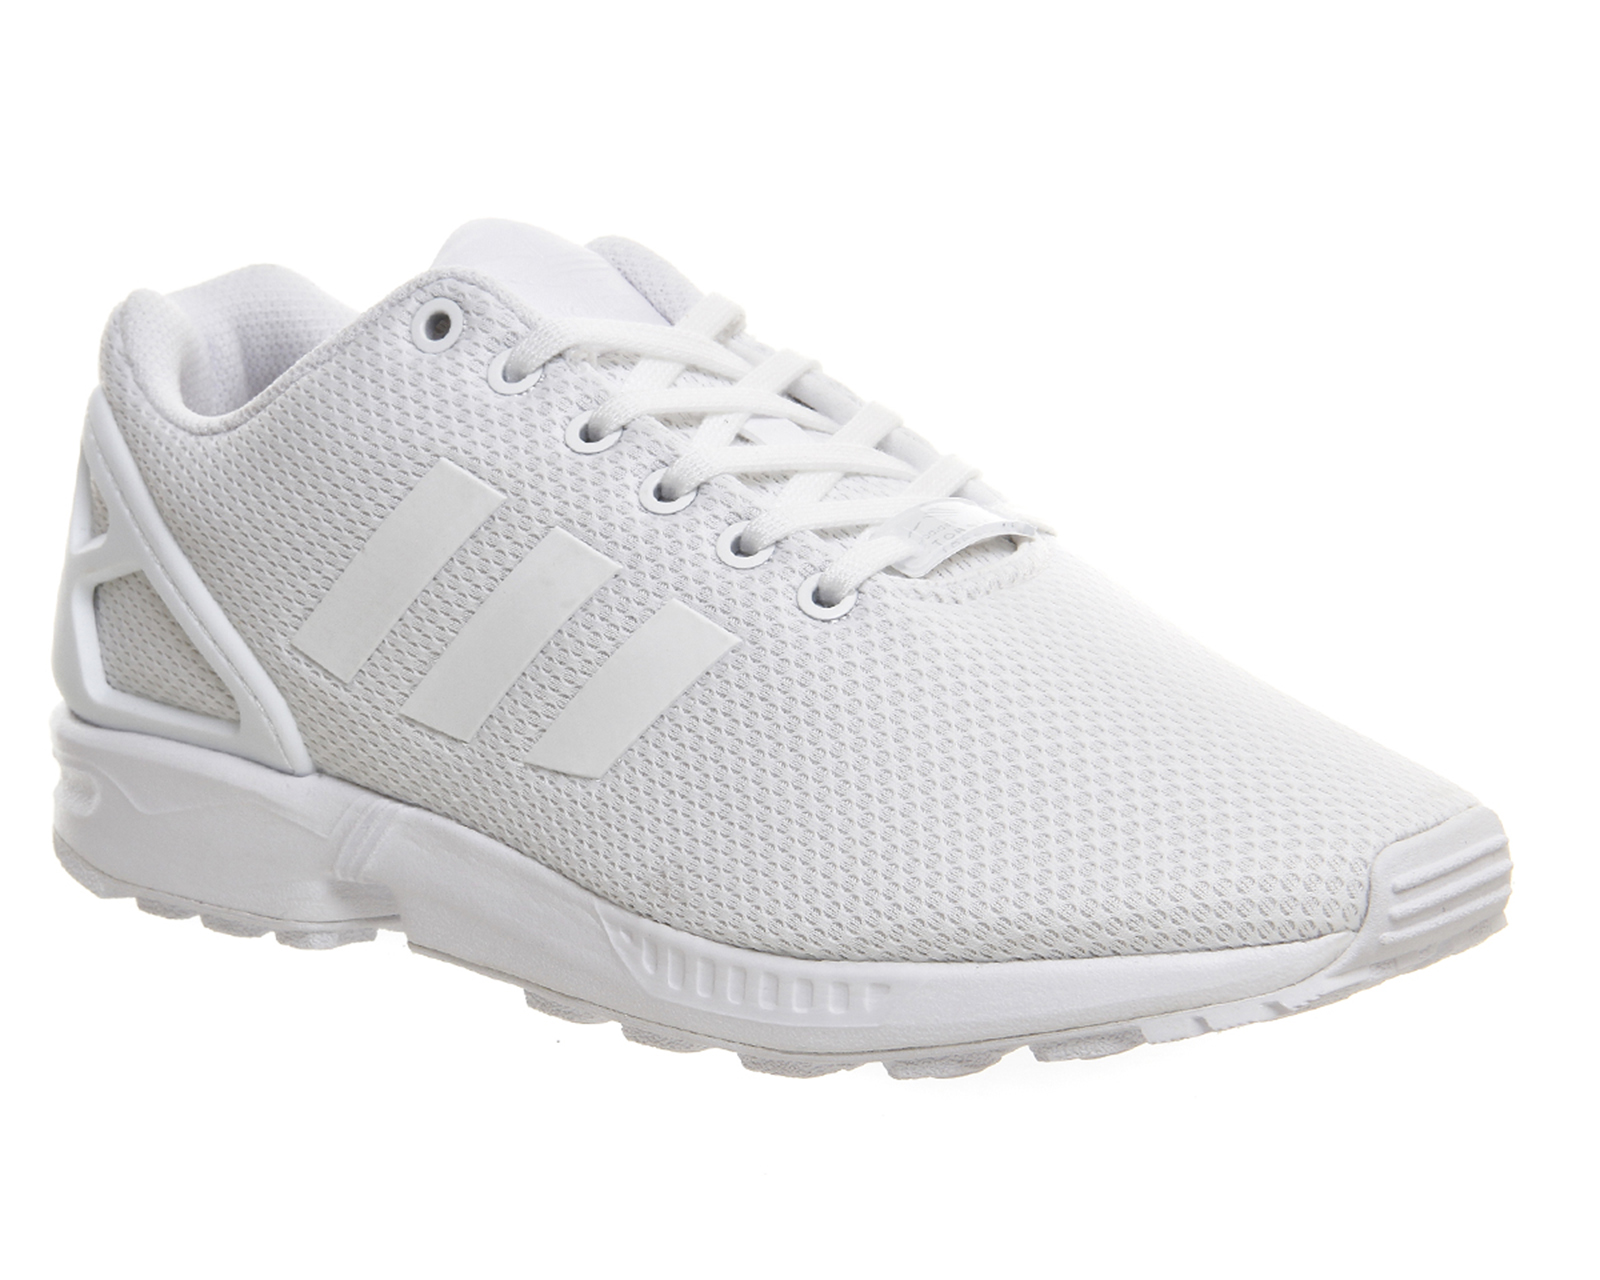 adidas zx flux black and white mens